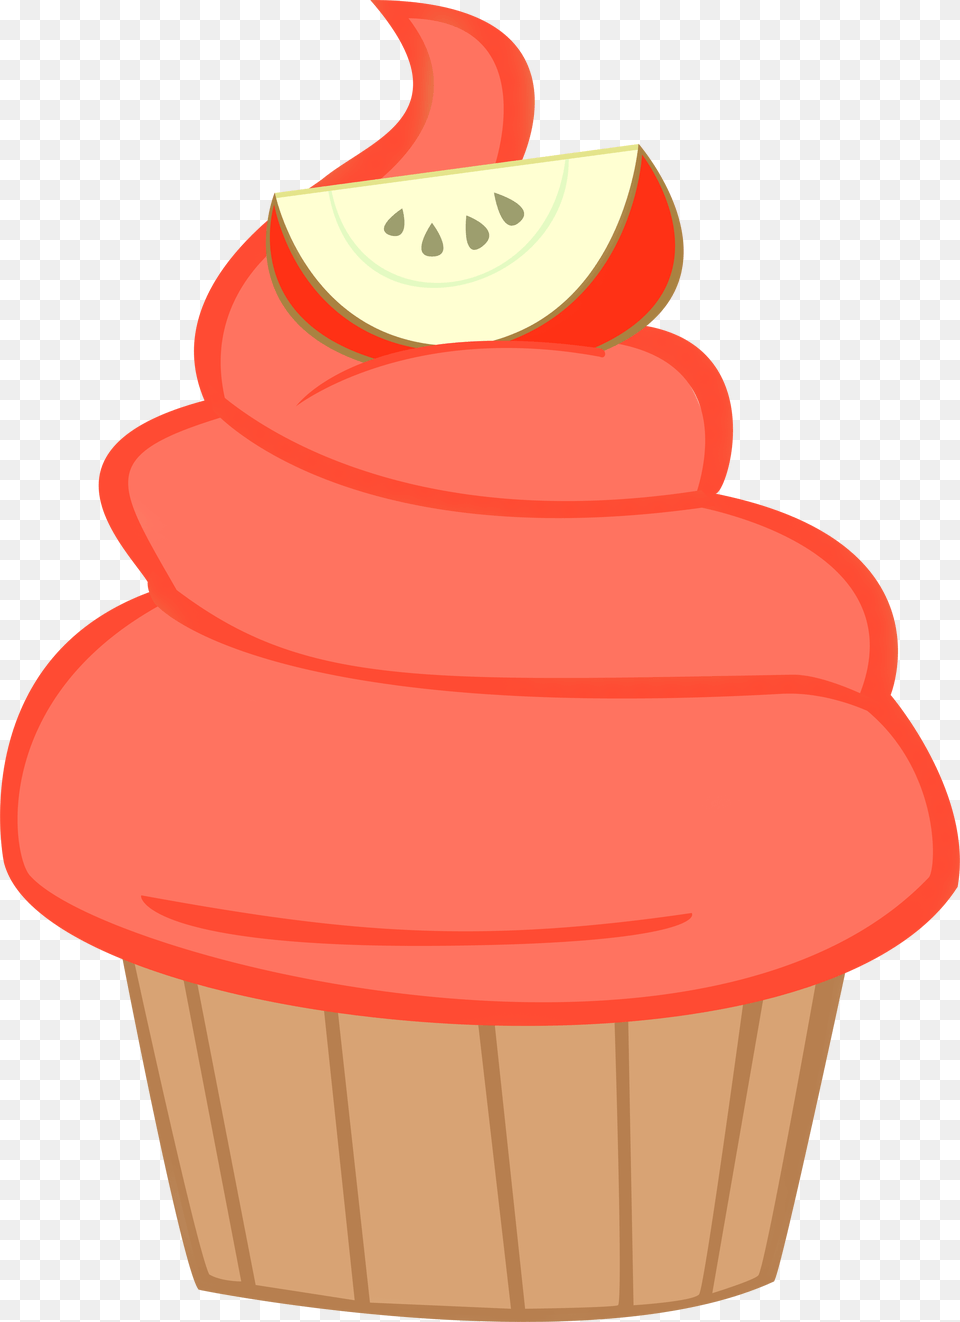 Image Result For Mlp My Little Pony Apple Cupcakes, Cake, Cream, Cupcake, Dessert Free Png